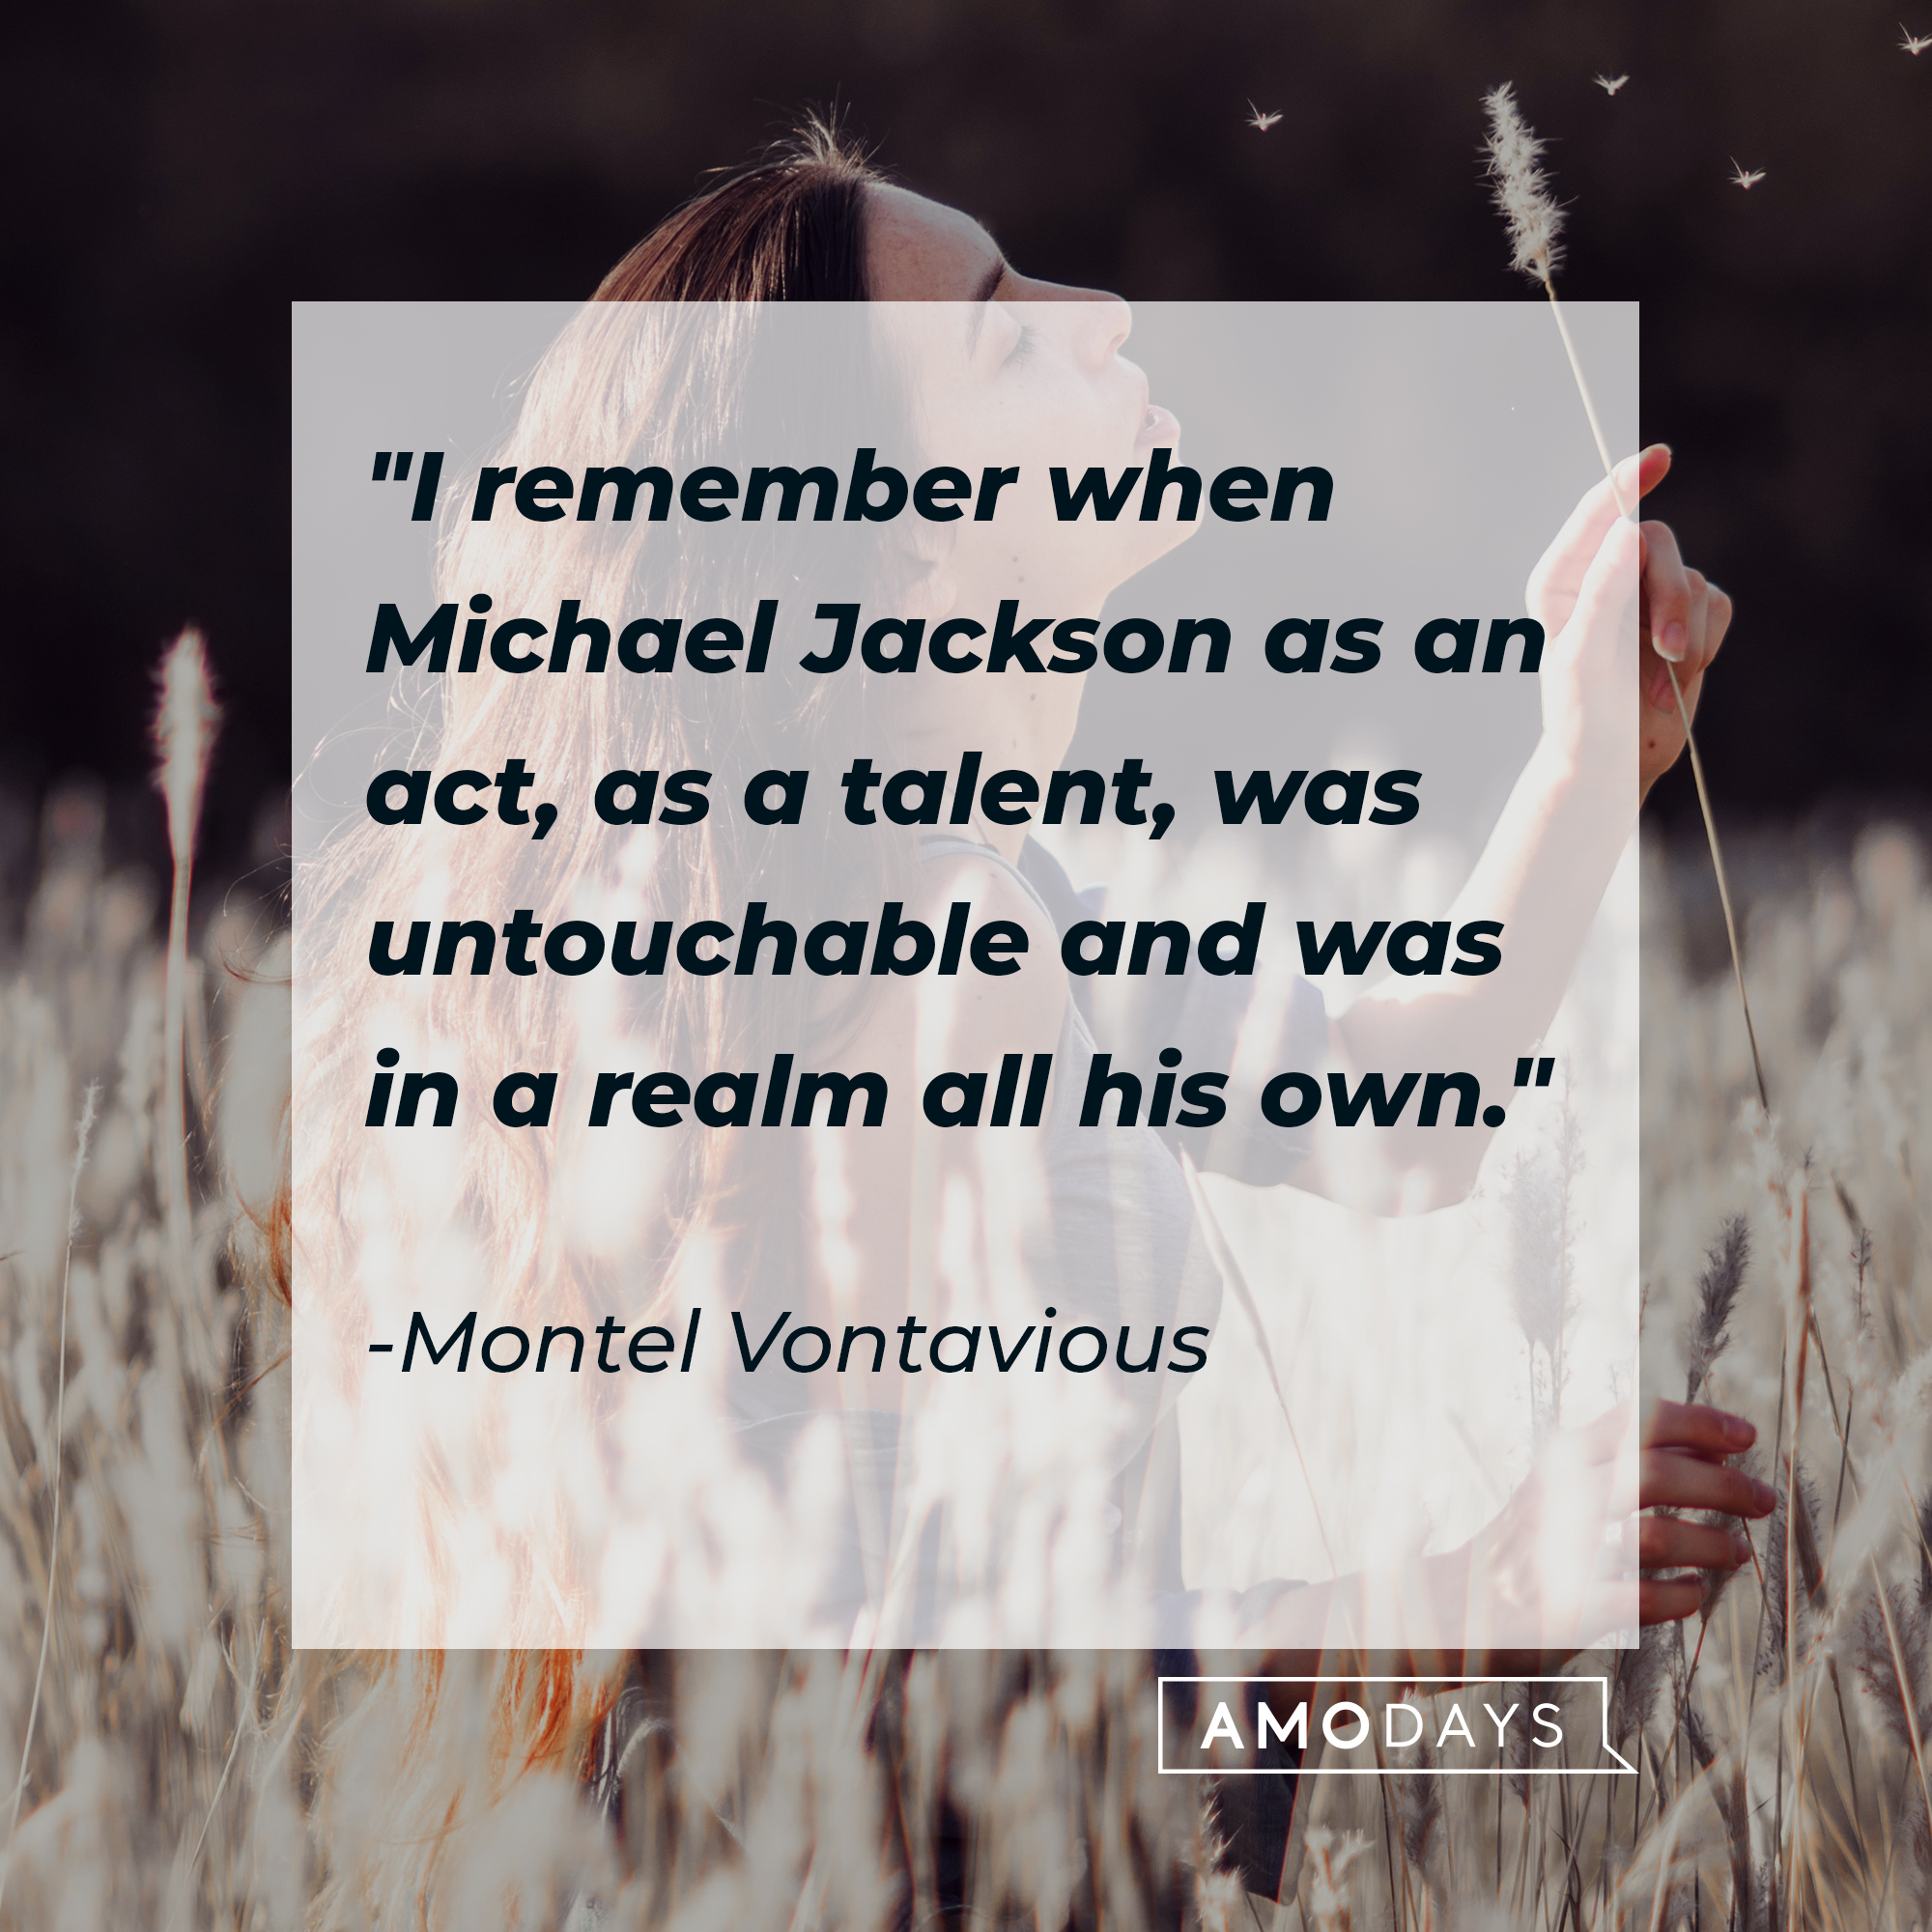 Montel Vontavious' quote: "I remember when Michael Jackson as an act, as a talent, was untouchable and was in a realm all his own." | Source: Unsplash